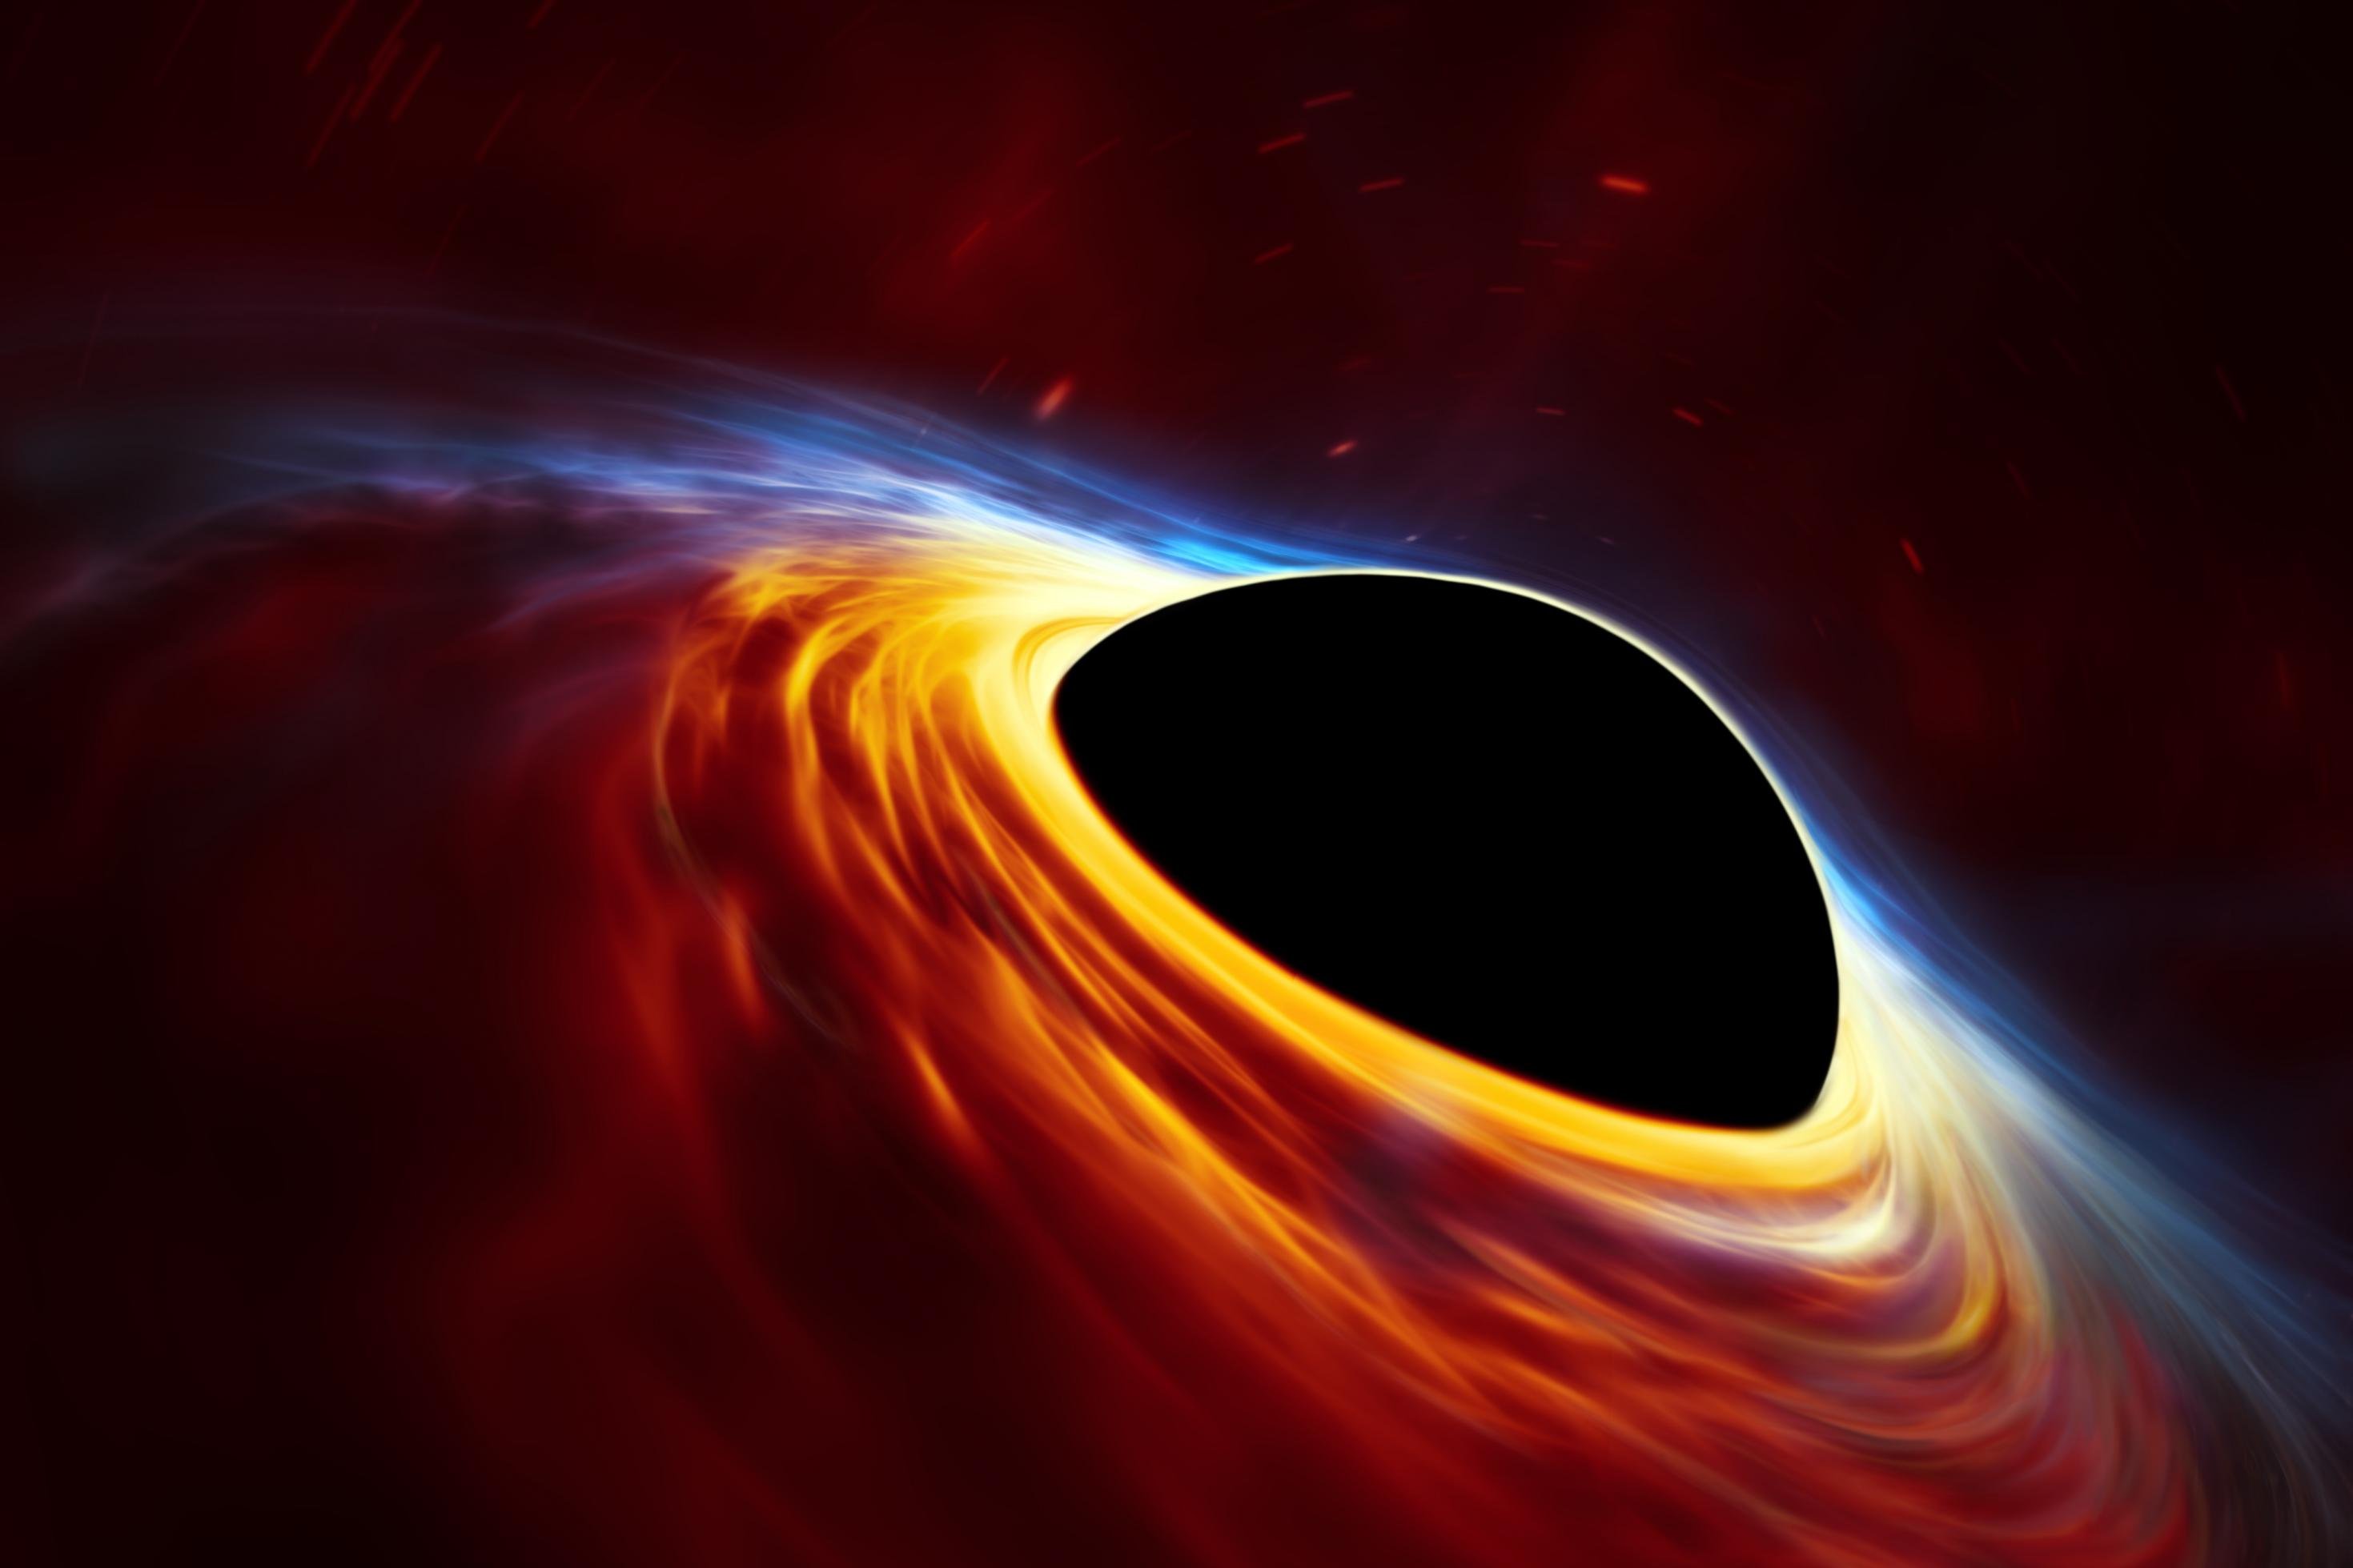 This artist?s impression depicts a rapidly spinning supermassive black hole surrounded by an accretion disc. This thin disc of rotating material consists of the leftovers of a Sun-like star which was ripped apart by the tidal forces of the black hole. Shocks in the colliding debris as well as heat generated in accretion led to a burst of light, resembling a supernova explosion.